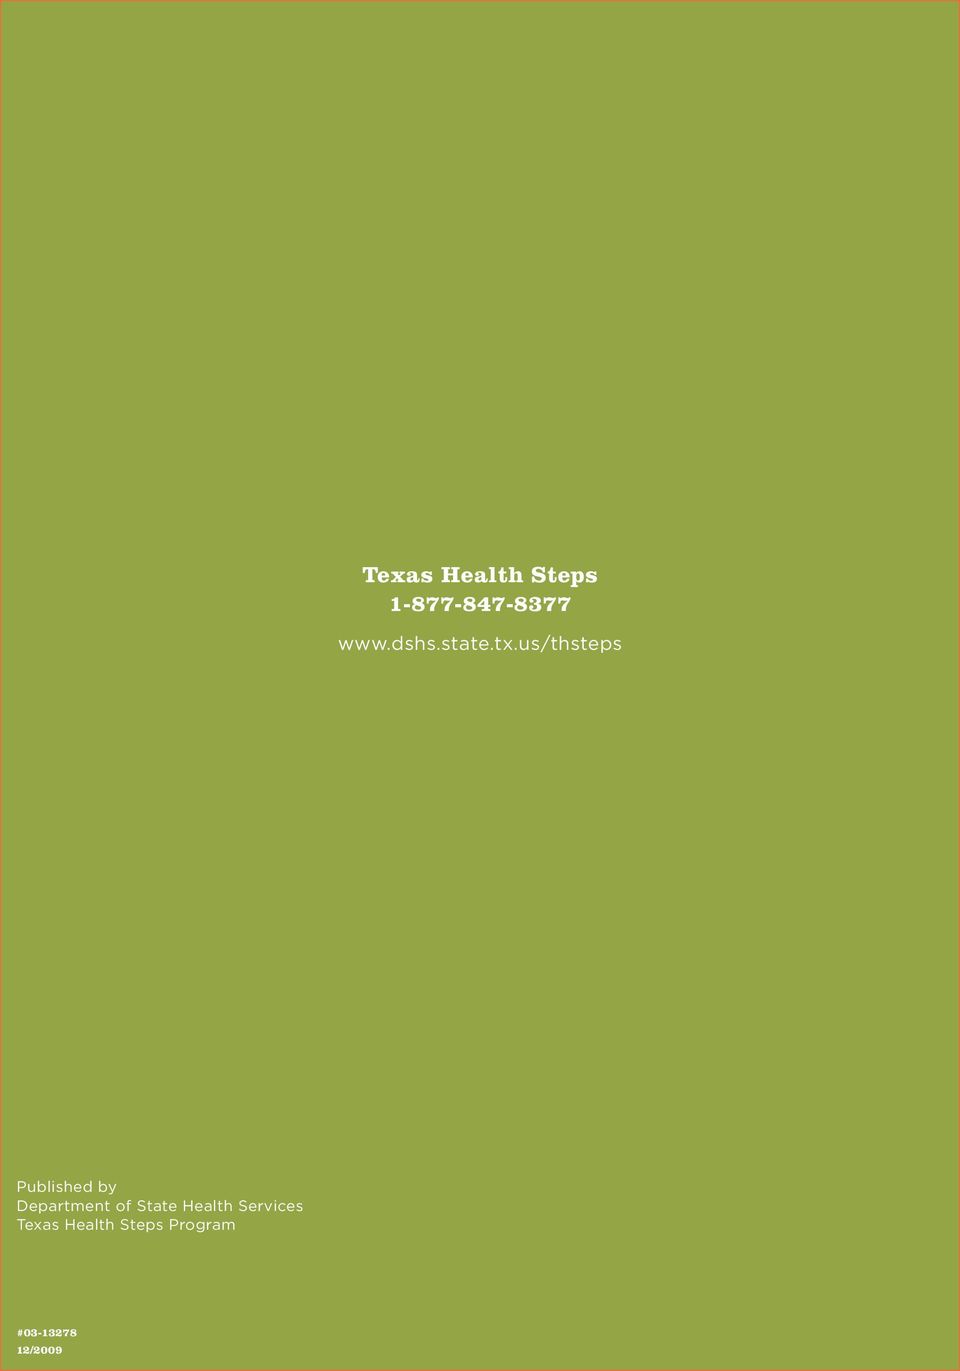 us/thsteps Published by Department of